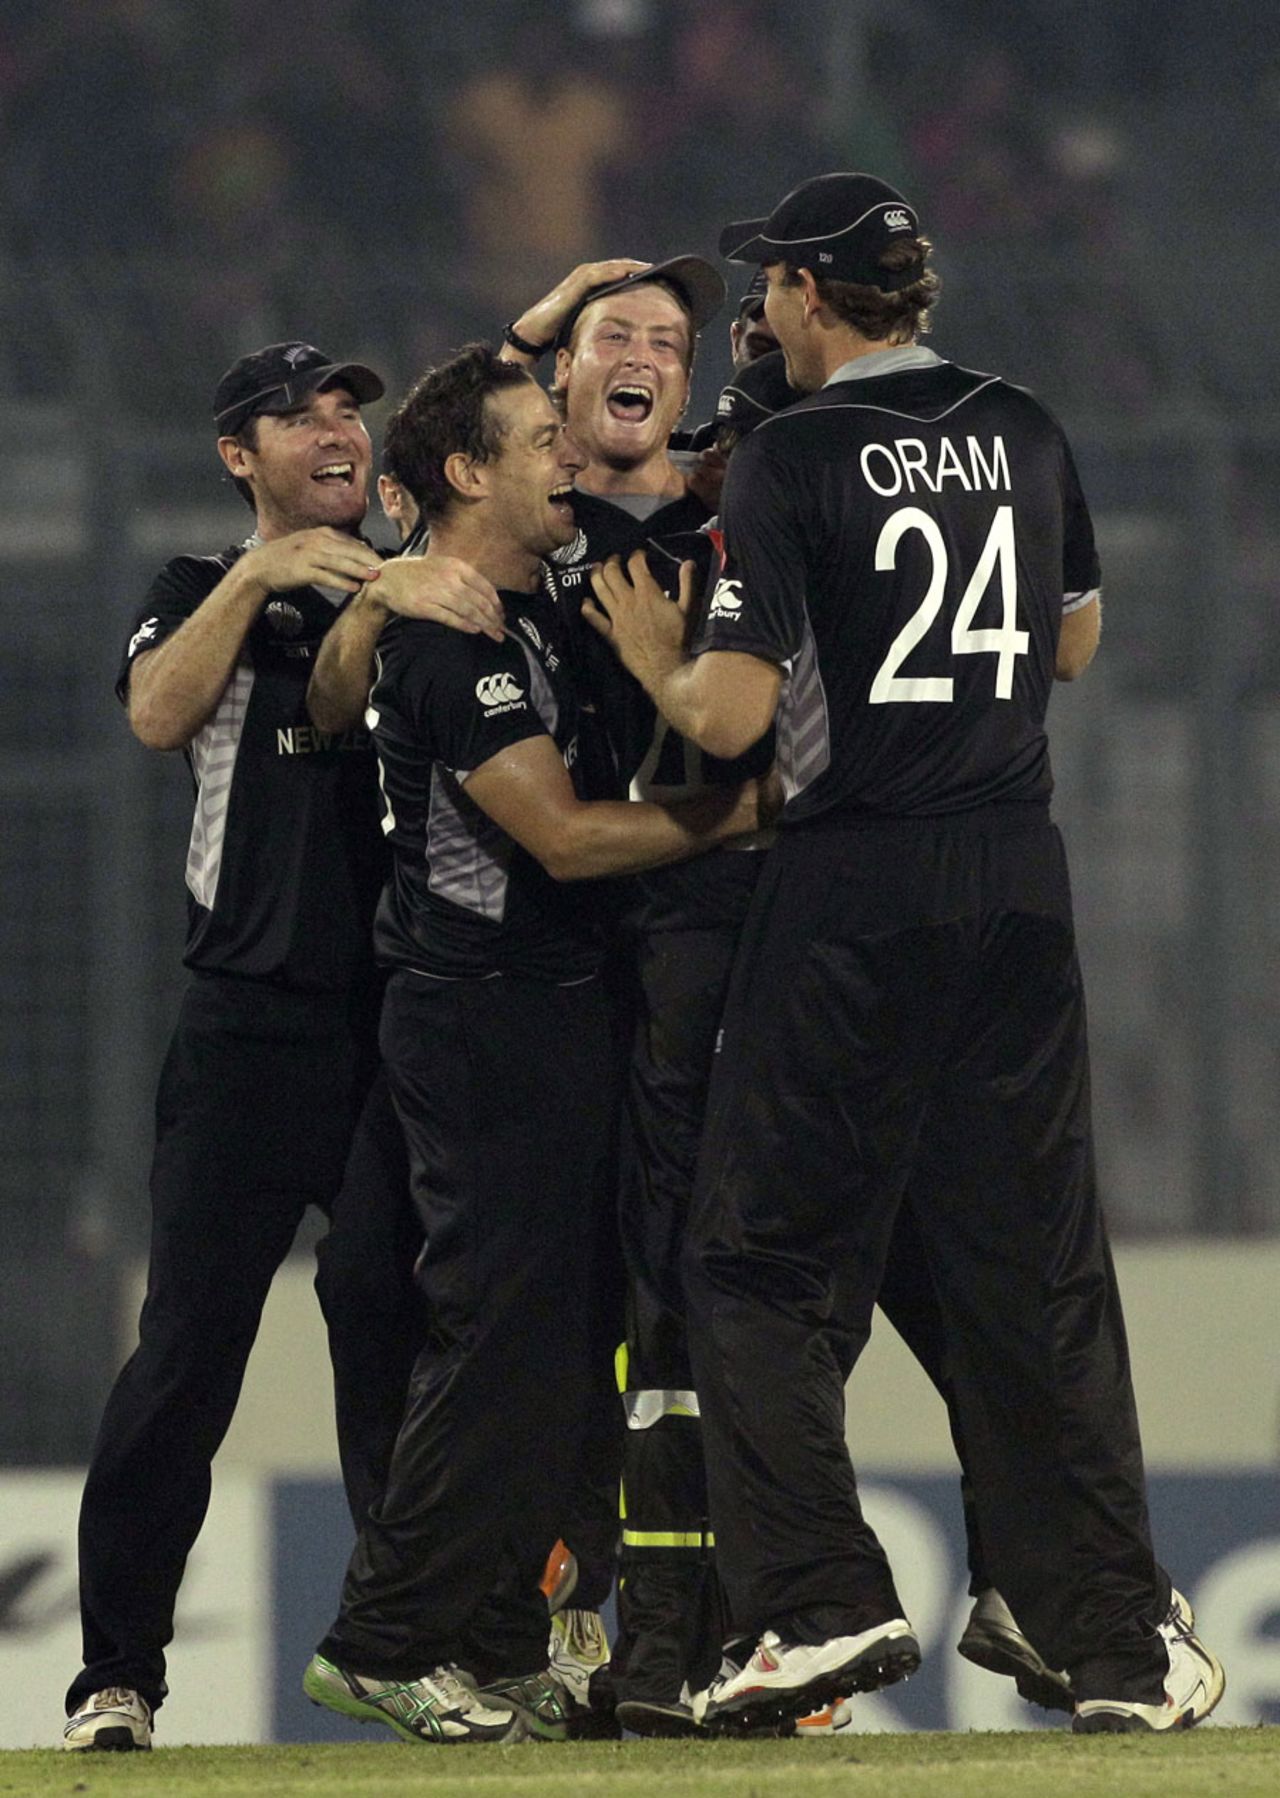 New Zealand are ecstatic after running out AB de Villiers, New Zealand v South Africa, 3rd quarter-final, Mirpur, World Cup 2011, March 25, 2011